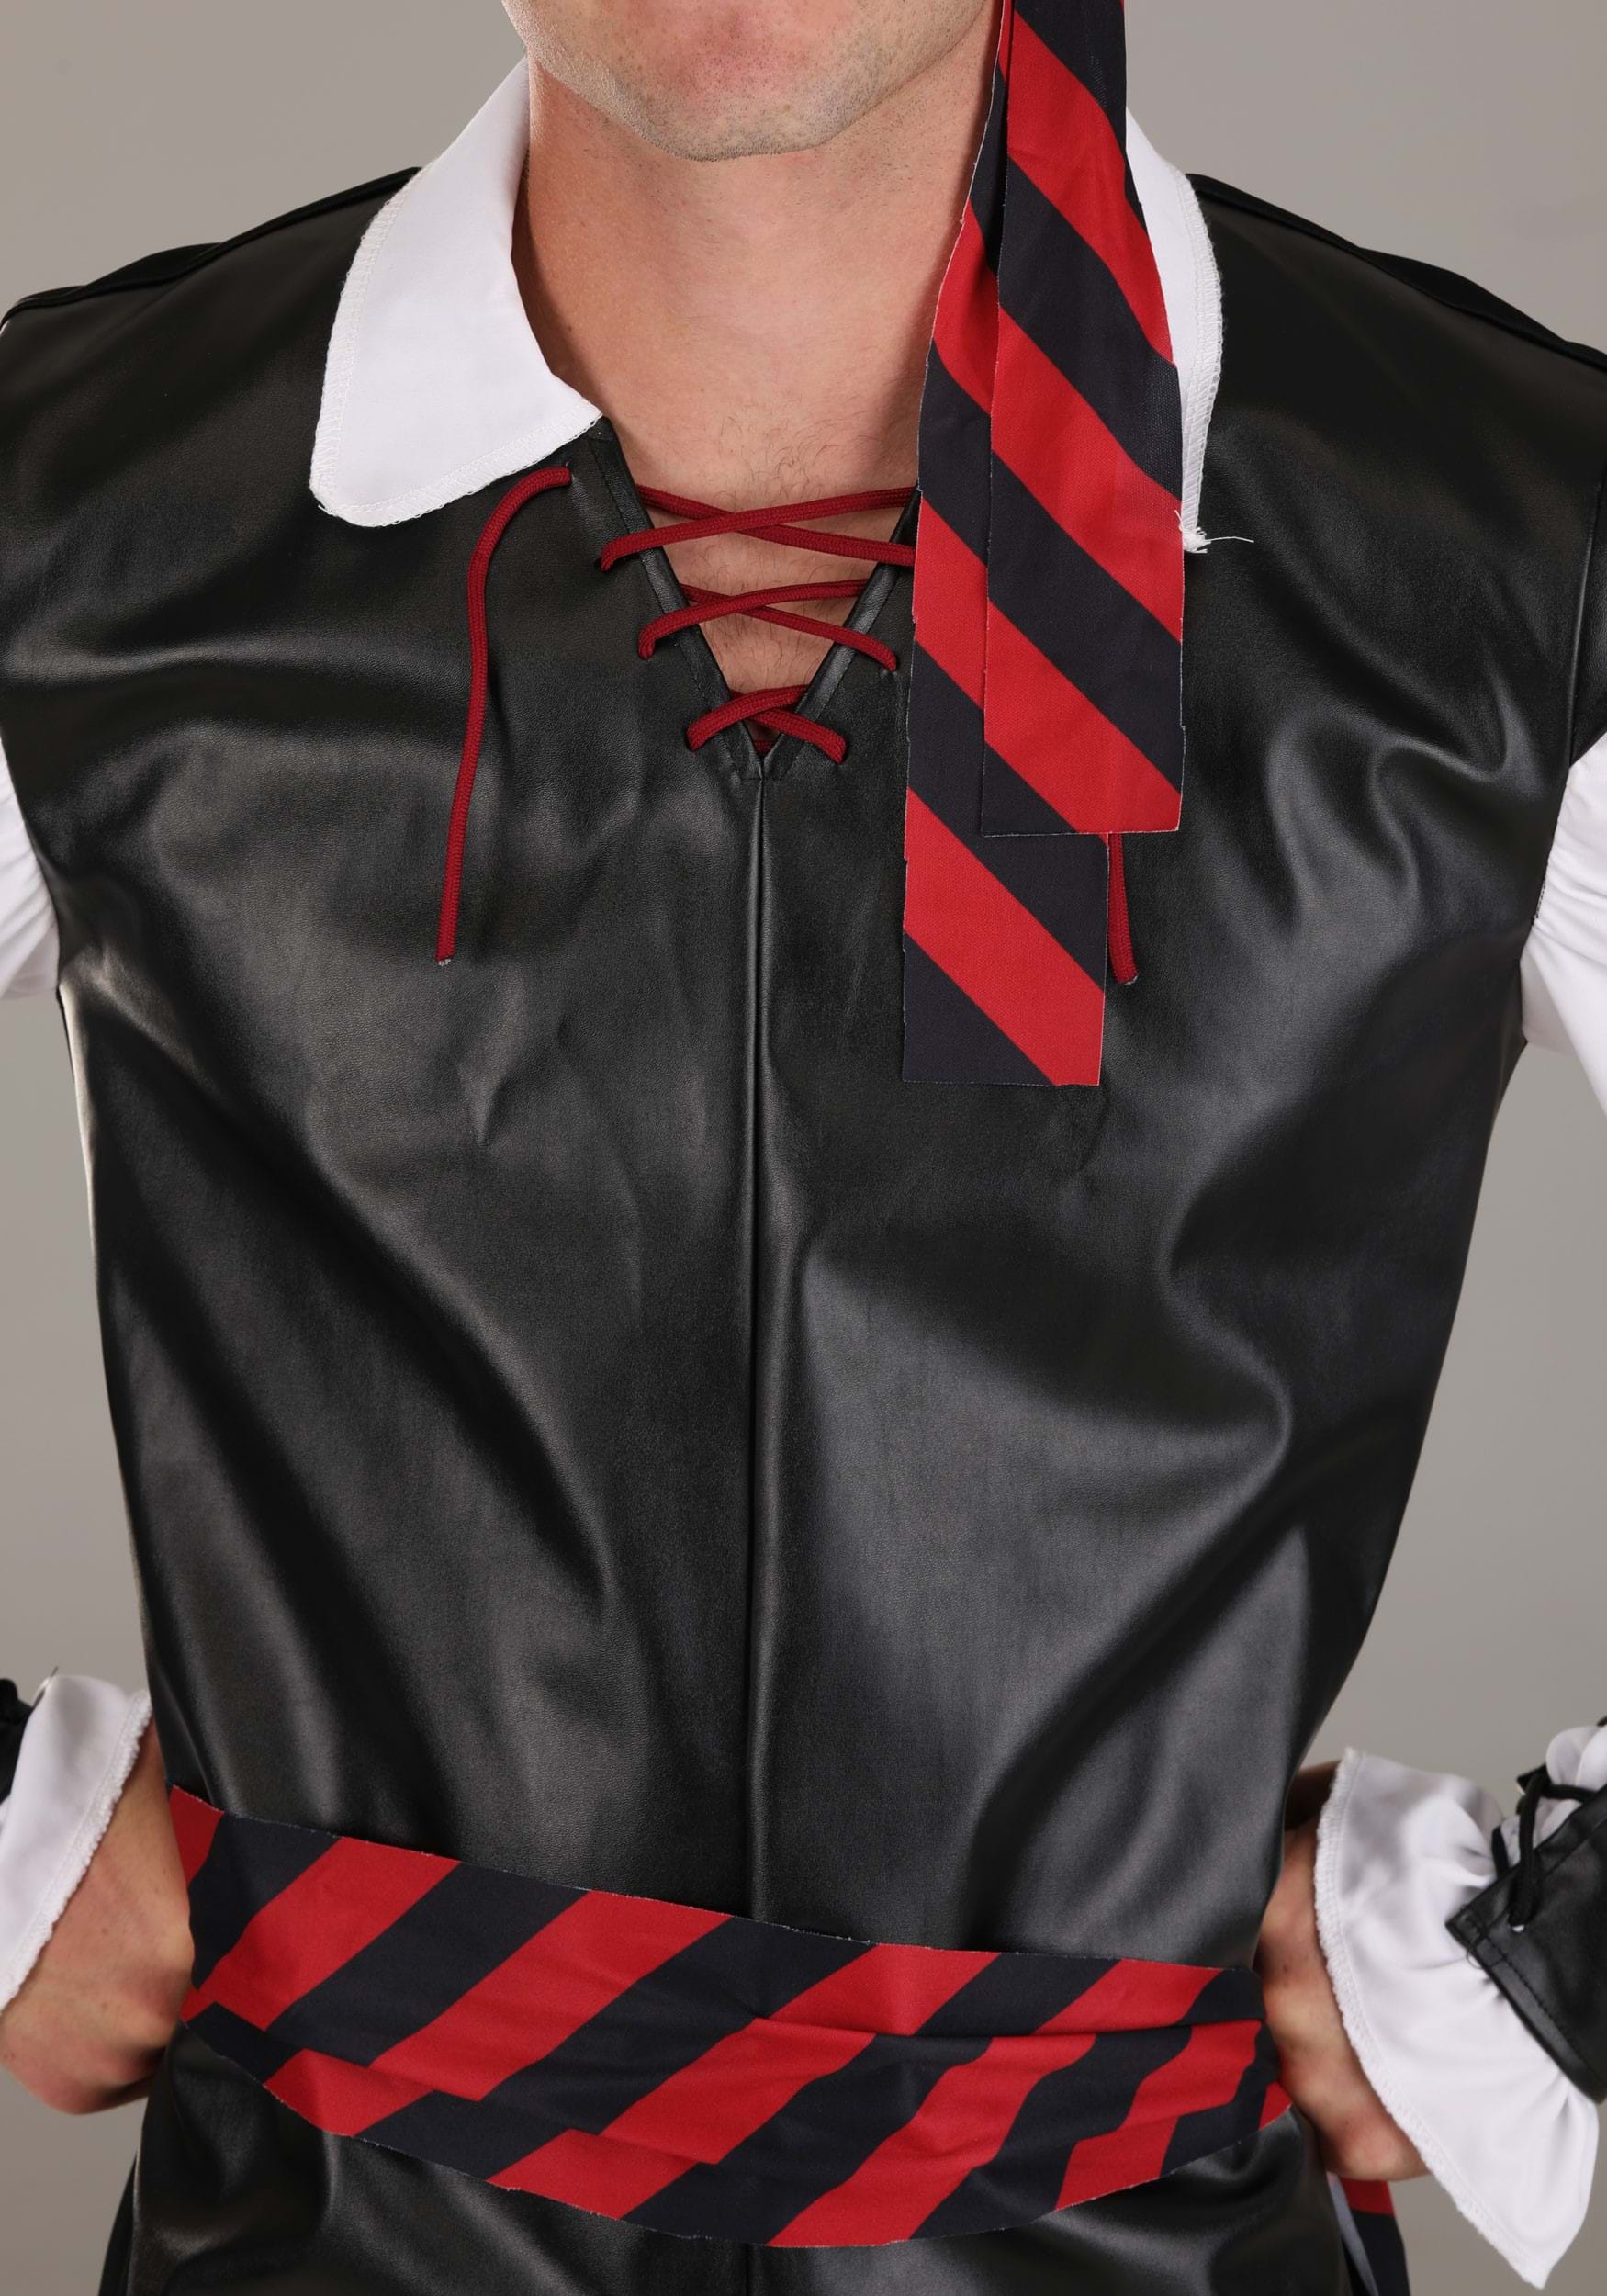 Budget Pirate Fancy Dress Costume For Men